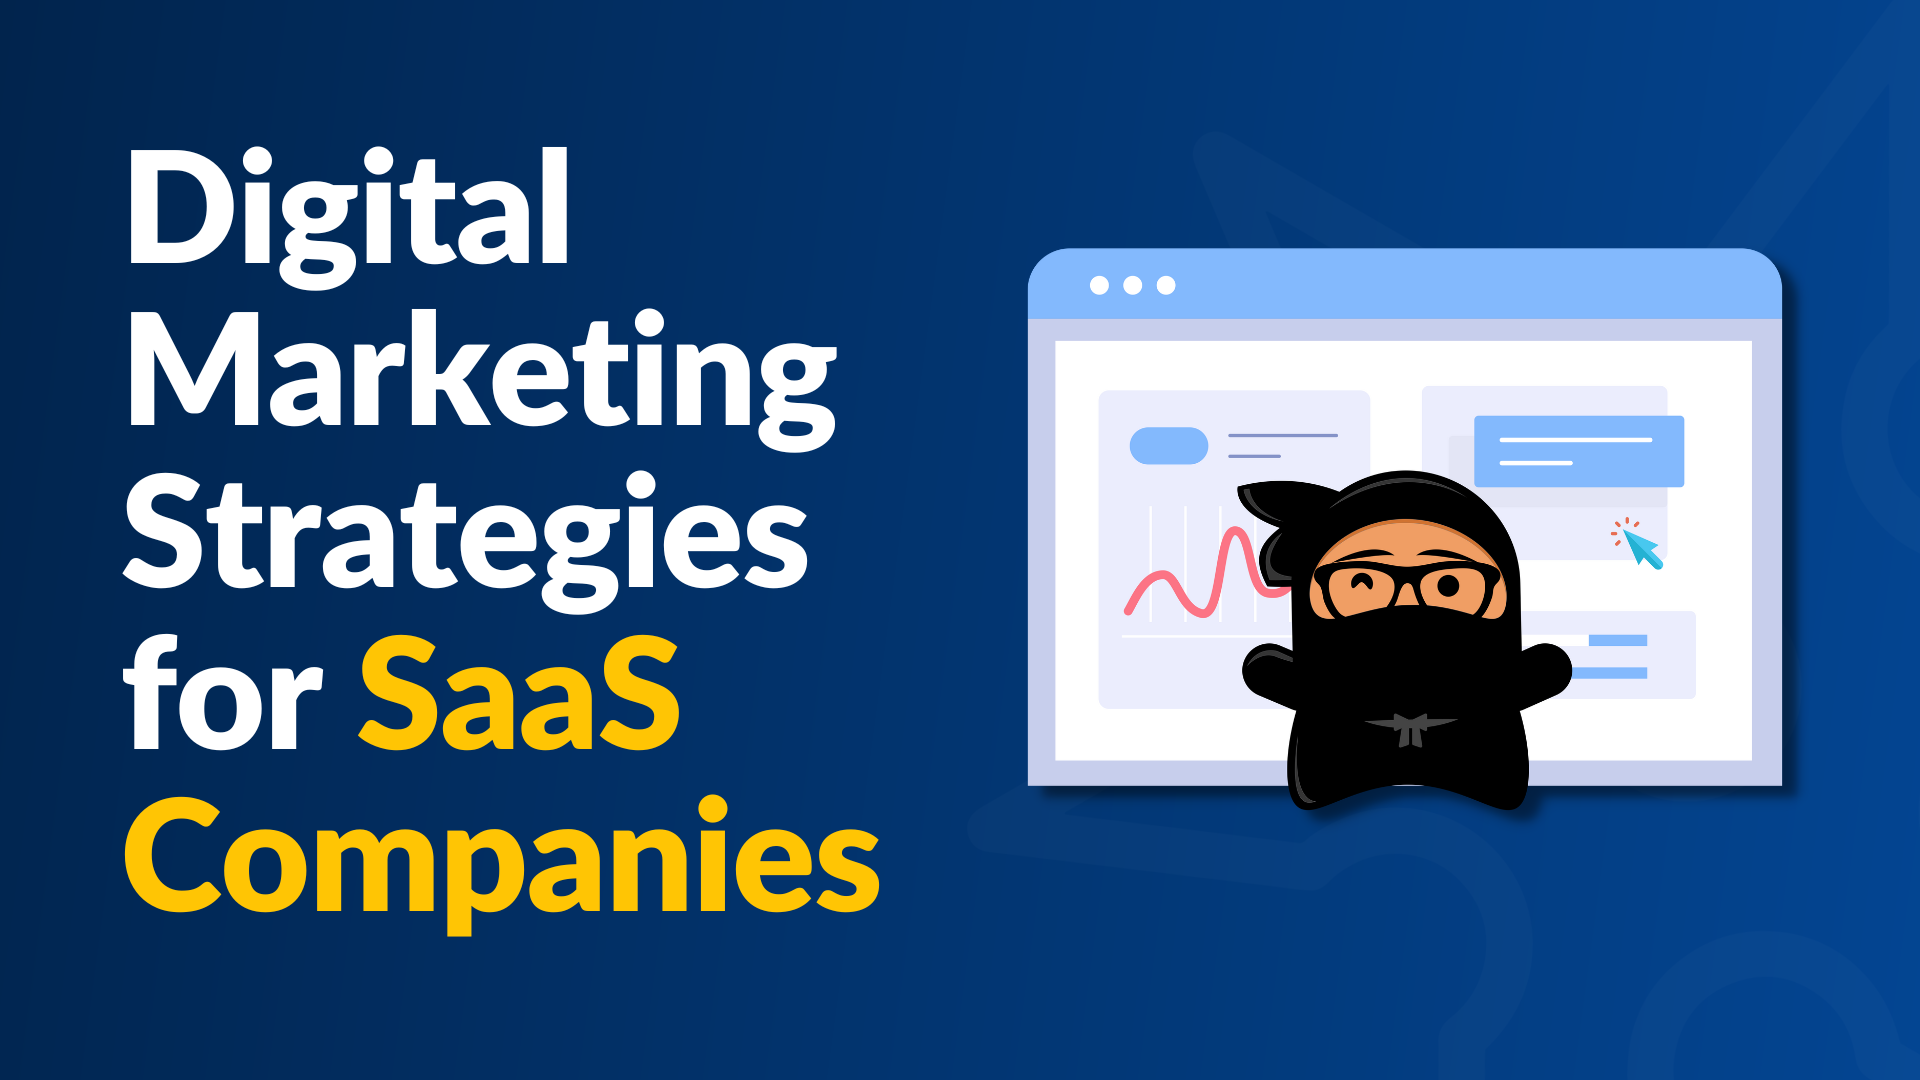 You are currently viewing SaaS (Software as a Service) digital marketing strategies are unique and require a specialized approach. Here are some of the best SaaS digital marketing strategies for 2023 based on the search results: